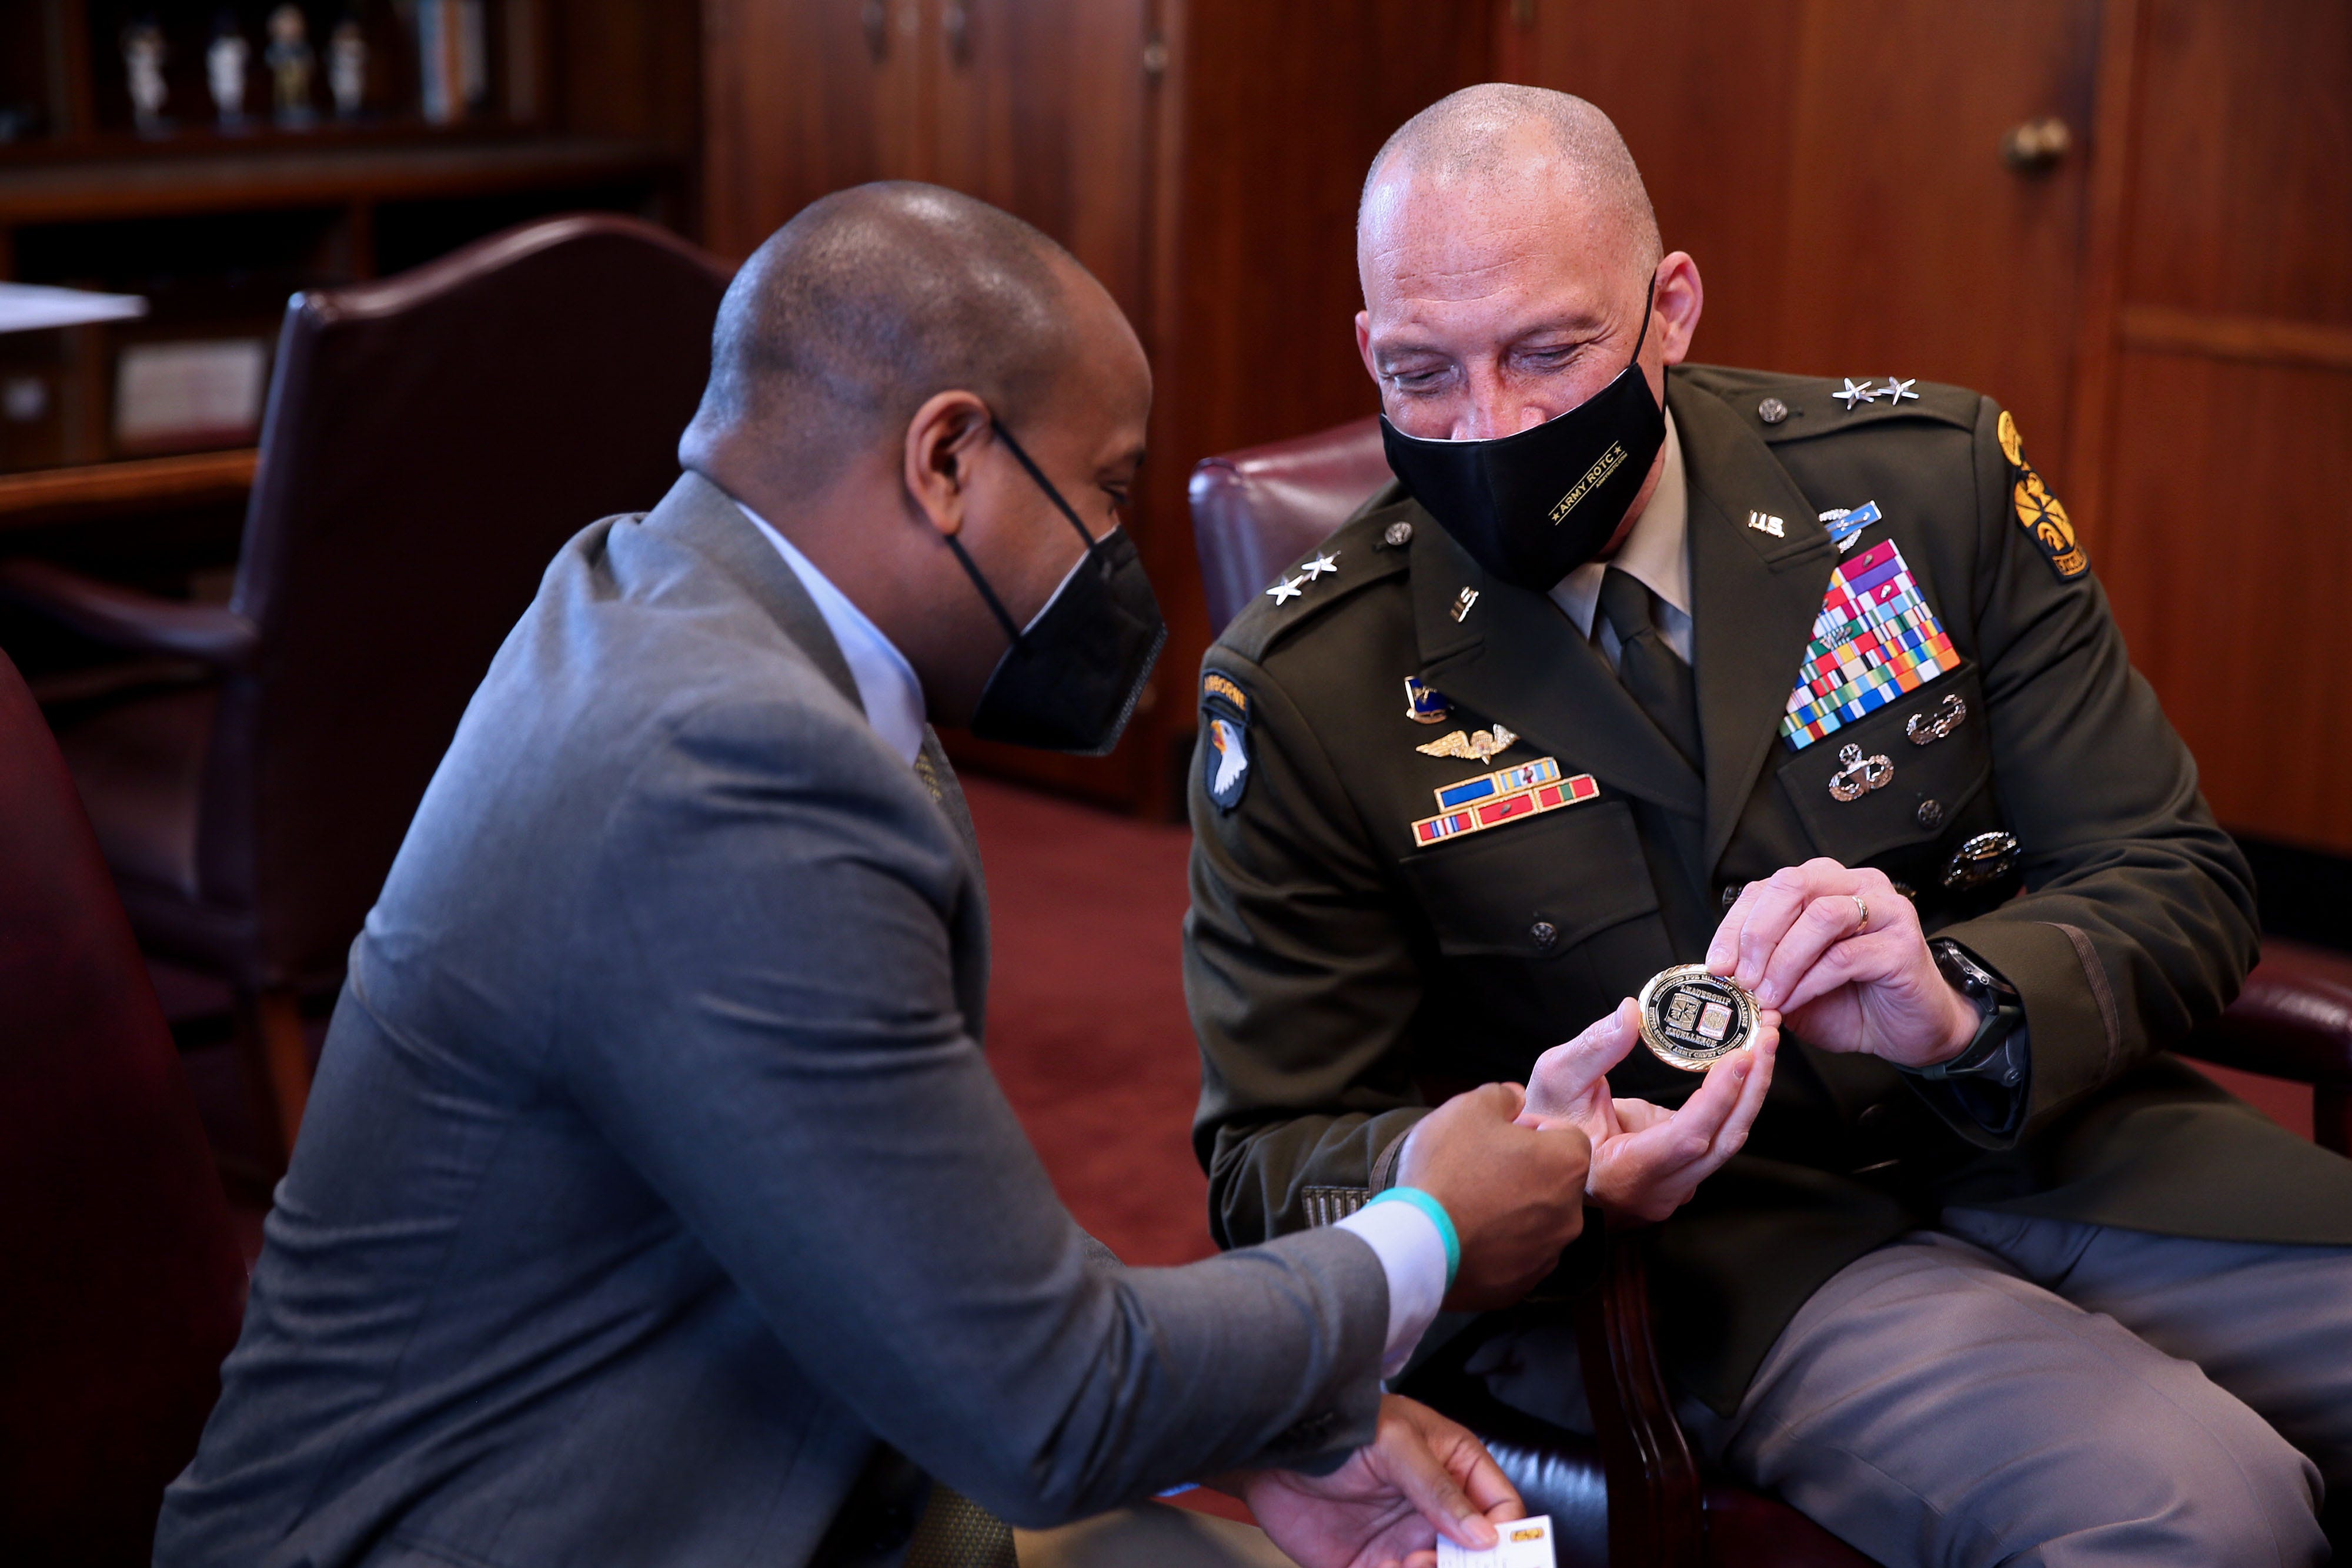 Mayor Cavalier Johnson, left, is presented with the CG commanders challenge coin from United States Army Major General Johnny K. Davis May 23 at Milwaukee at City Hall. The coin was given to Johnson as an appreciation for partnering with the JROTC programs in the city.